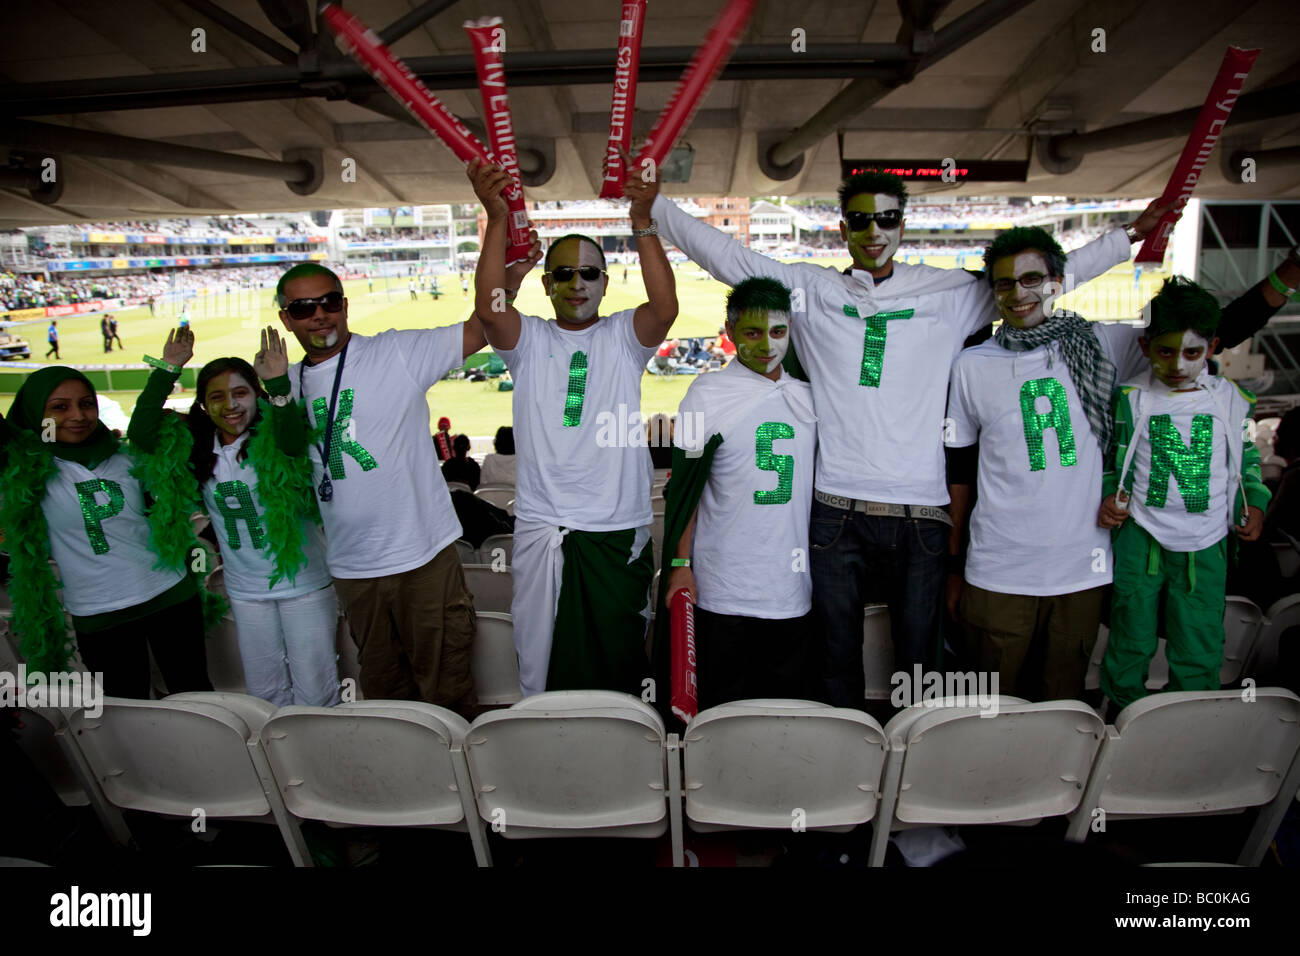 Pakistan fans during the ICC World Twenty20 Final between Pakistan and Sri Lanka at Lord's on June 21 2009 in London. Stock Photo